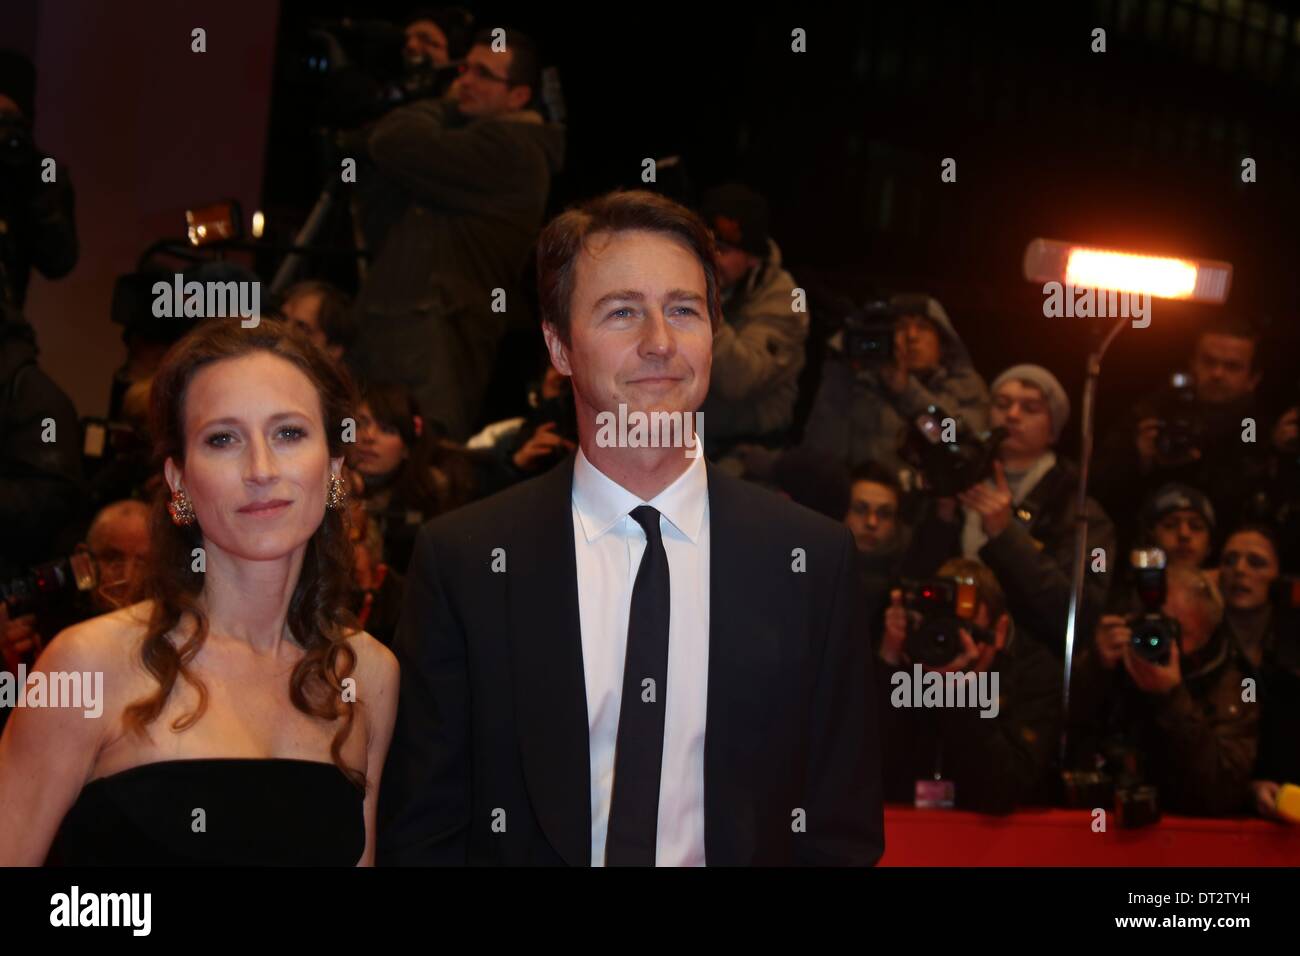 Actor Edward Norton and wife Shauna Robertson attend the world premiere of 'The Grand Budapest Hotel' during the 64th International Berlin Film Festival aka Berlinale at Berlinale Palast in Berlin, Germany, on 06 February 2014. Photo: Hubert Boesl Stock Photo